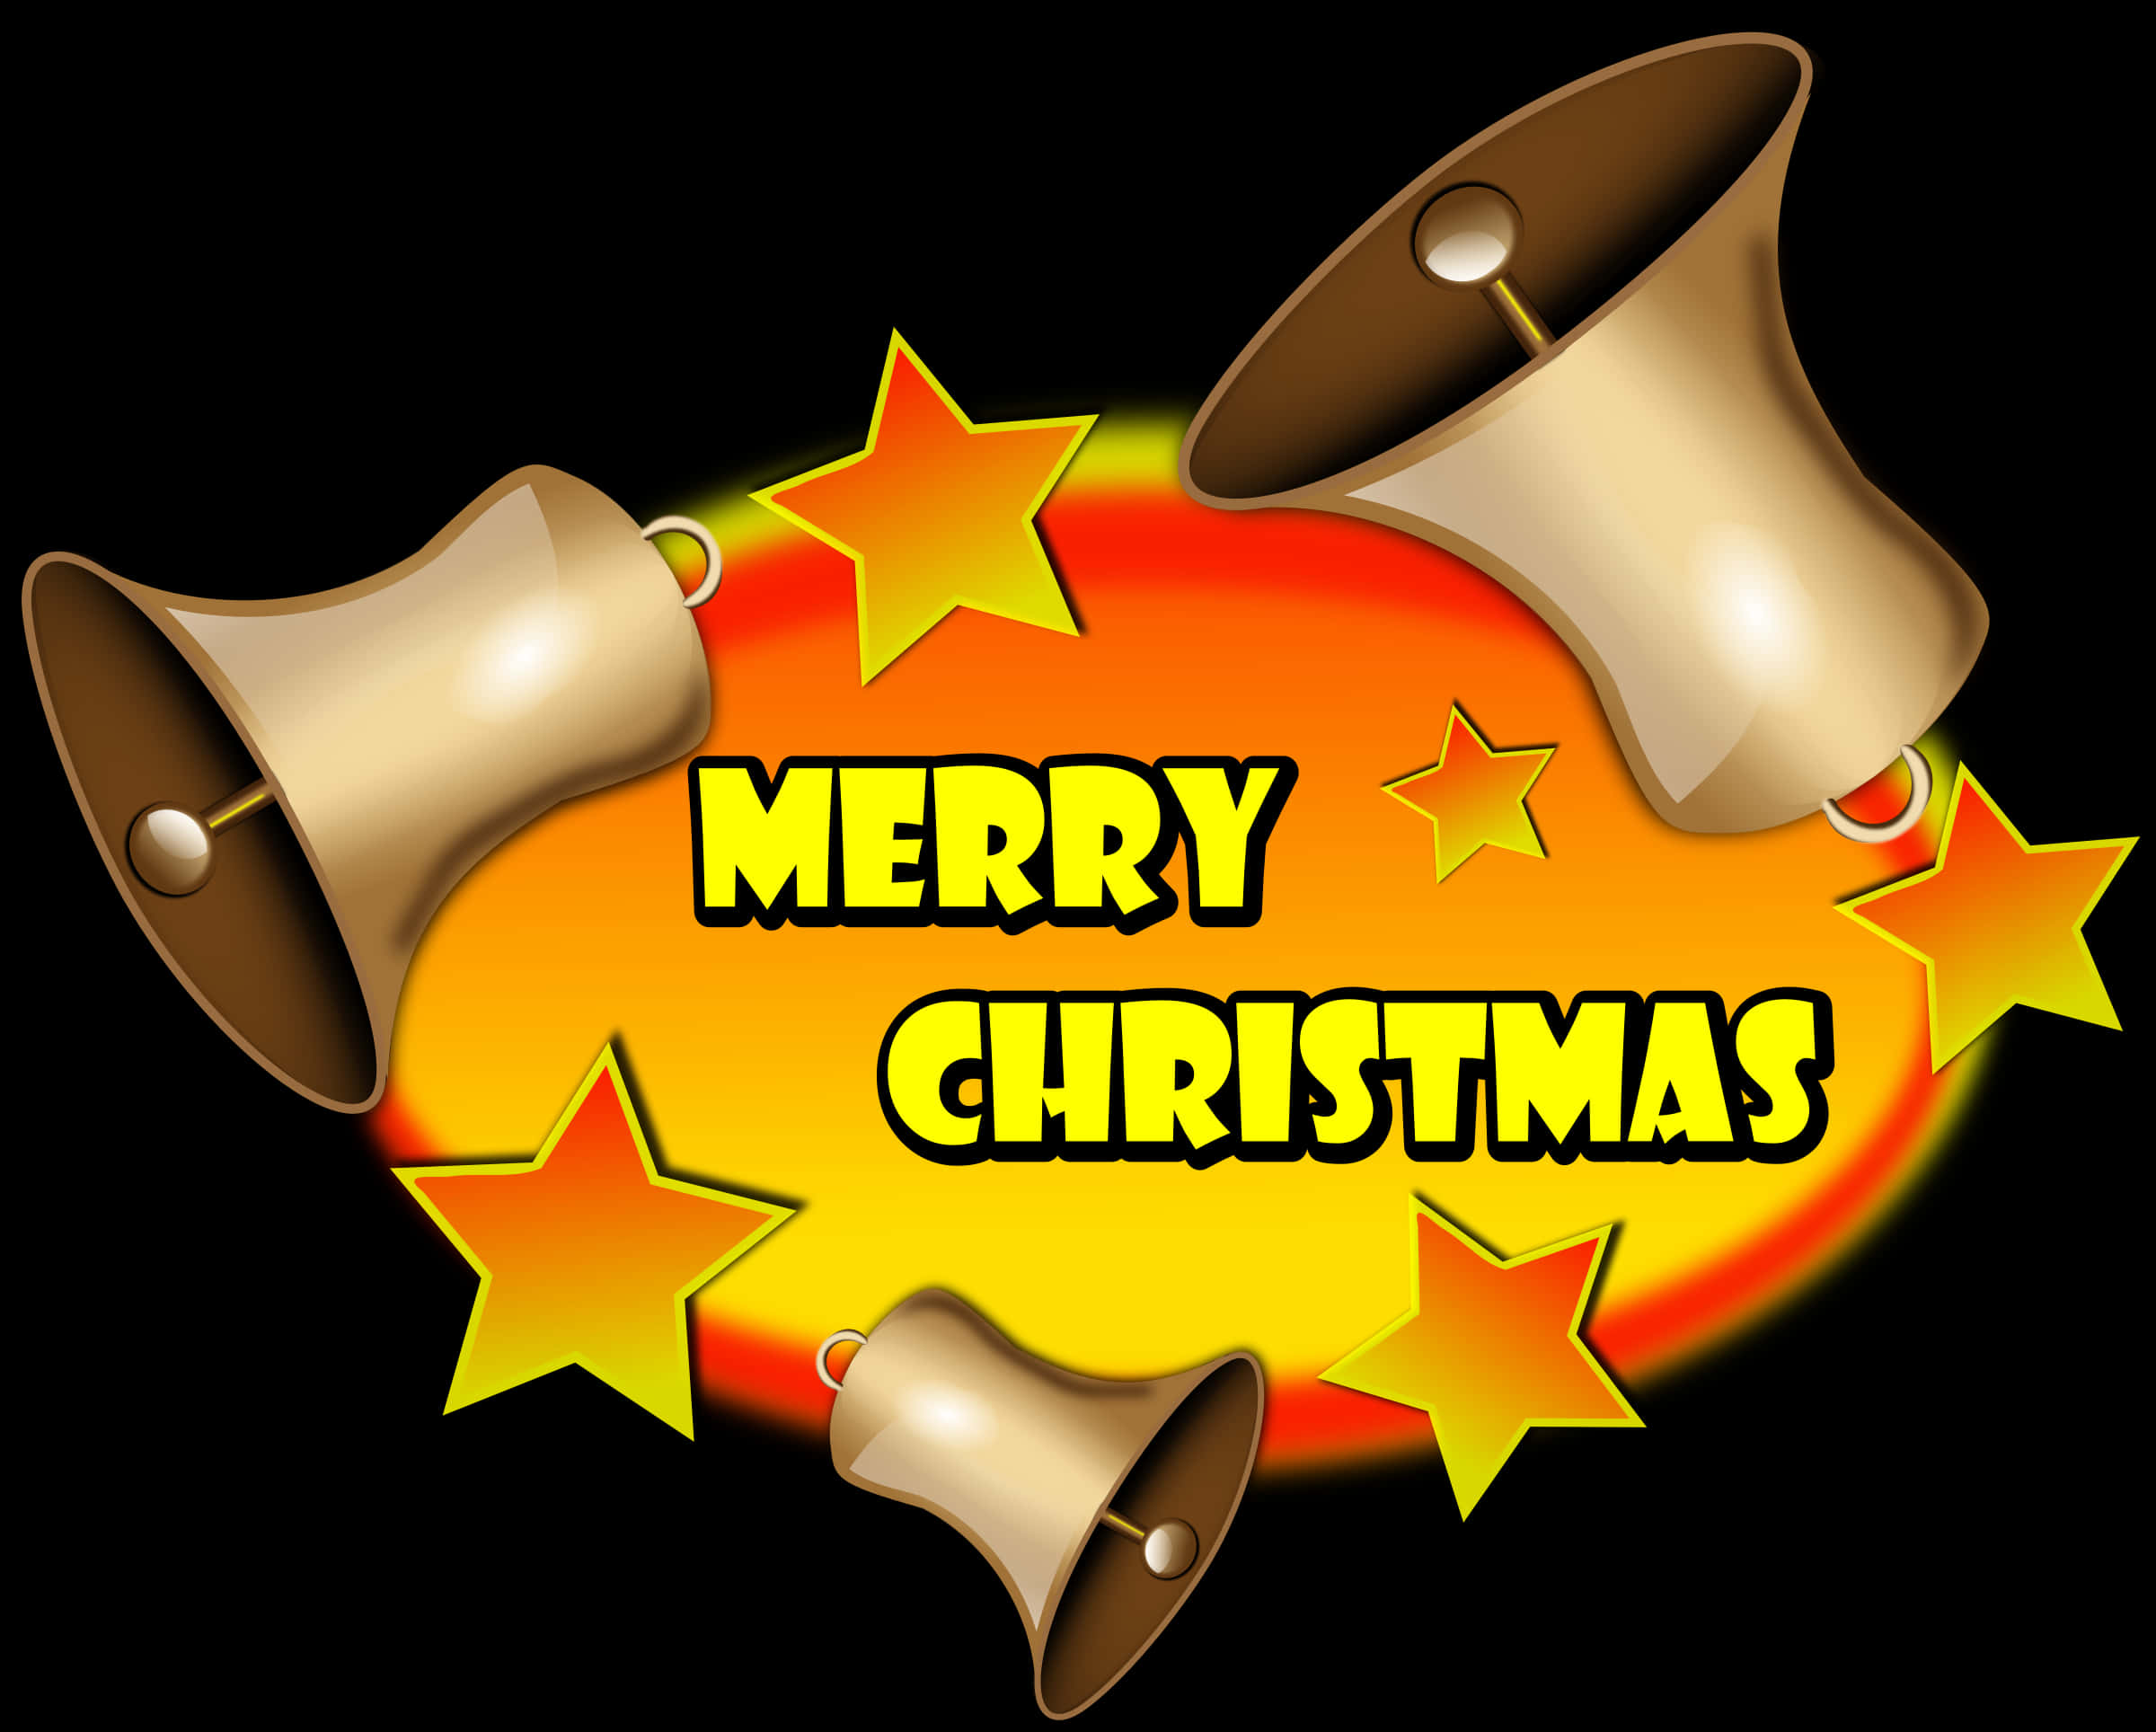 Merry Christmas Bells Graphic PNG